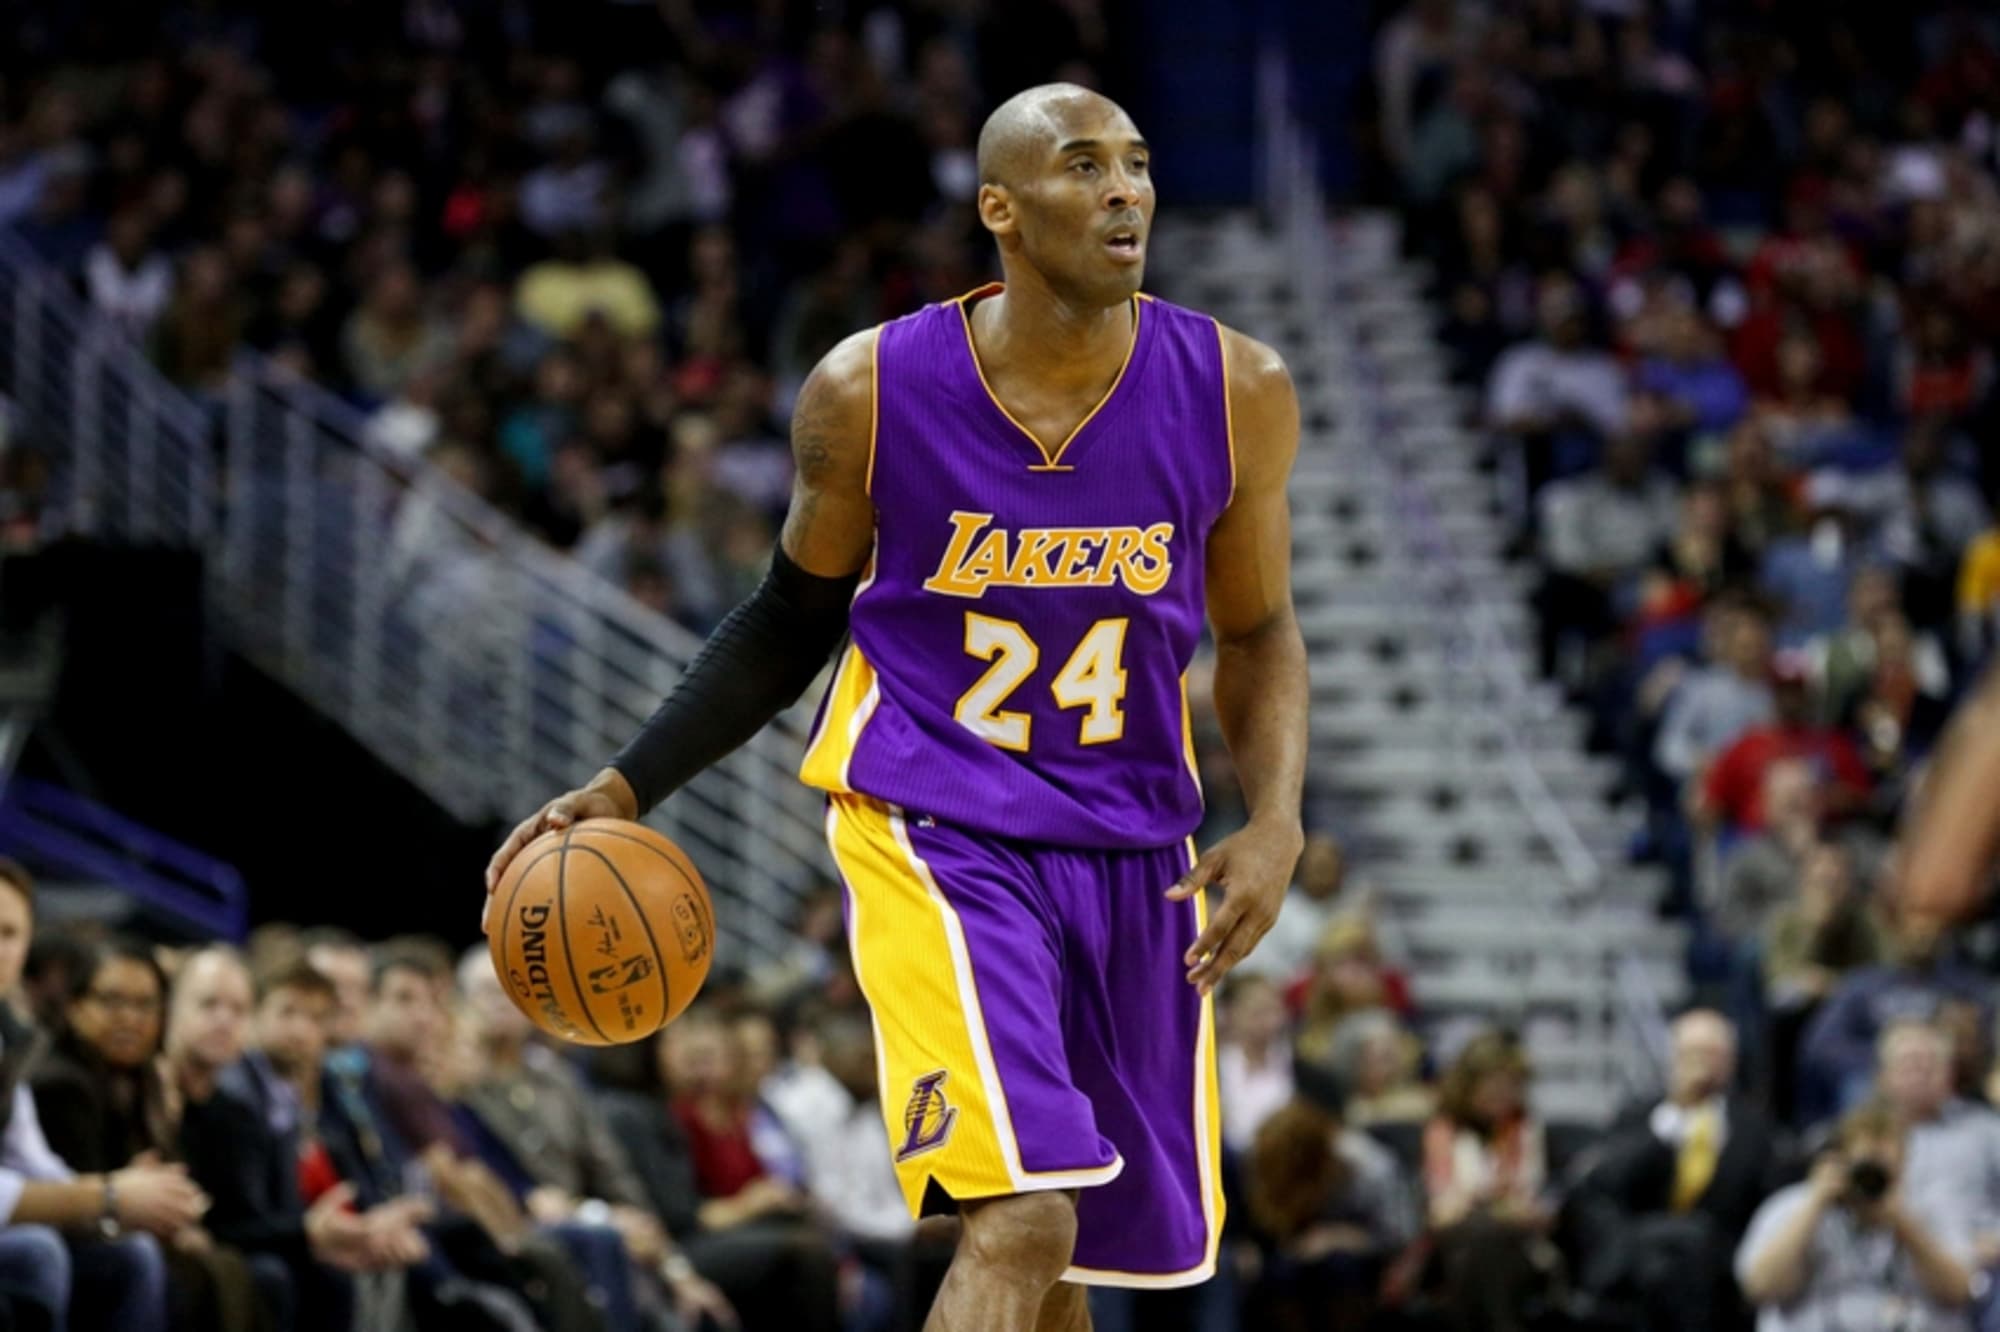 FILE: Kobe Bryant of the Los Angeles Lakers flexes his bicep as he dribbles  the ball down court during a National Basketball Association game at the  Great Western Forum in Los Angeles